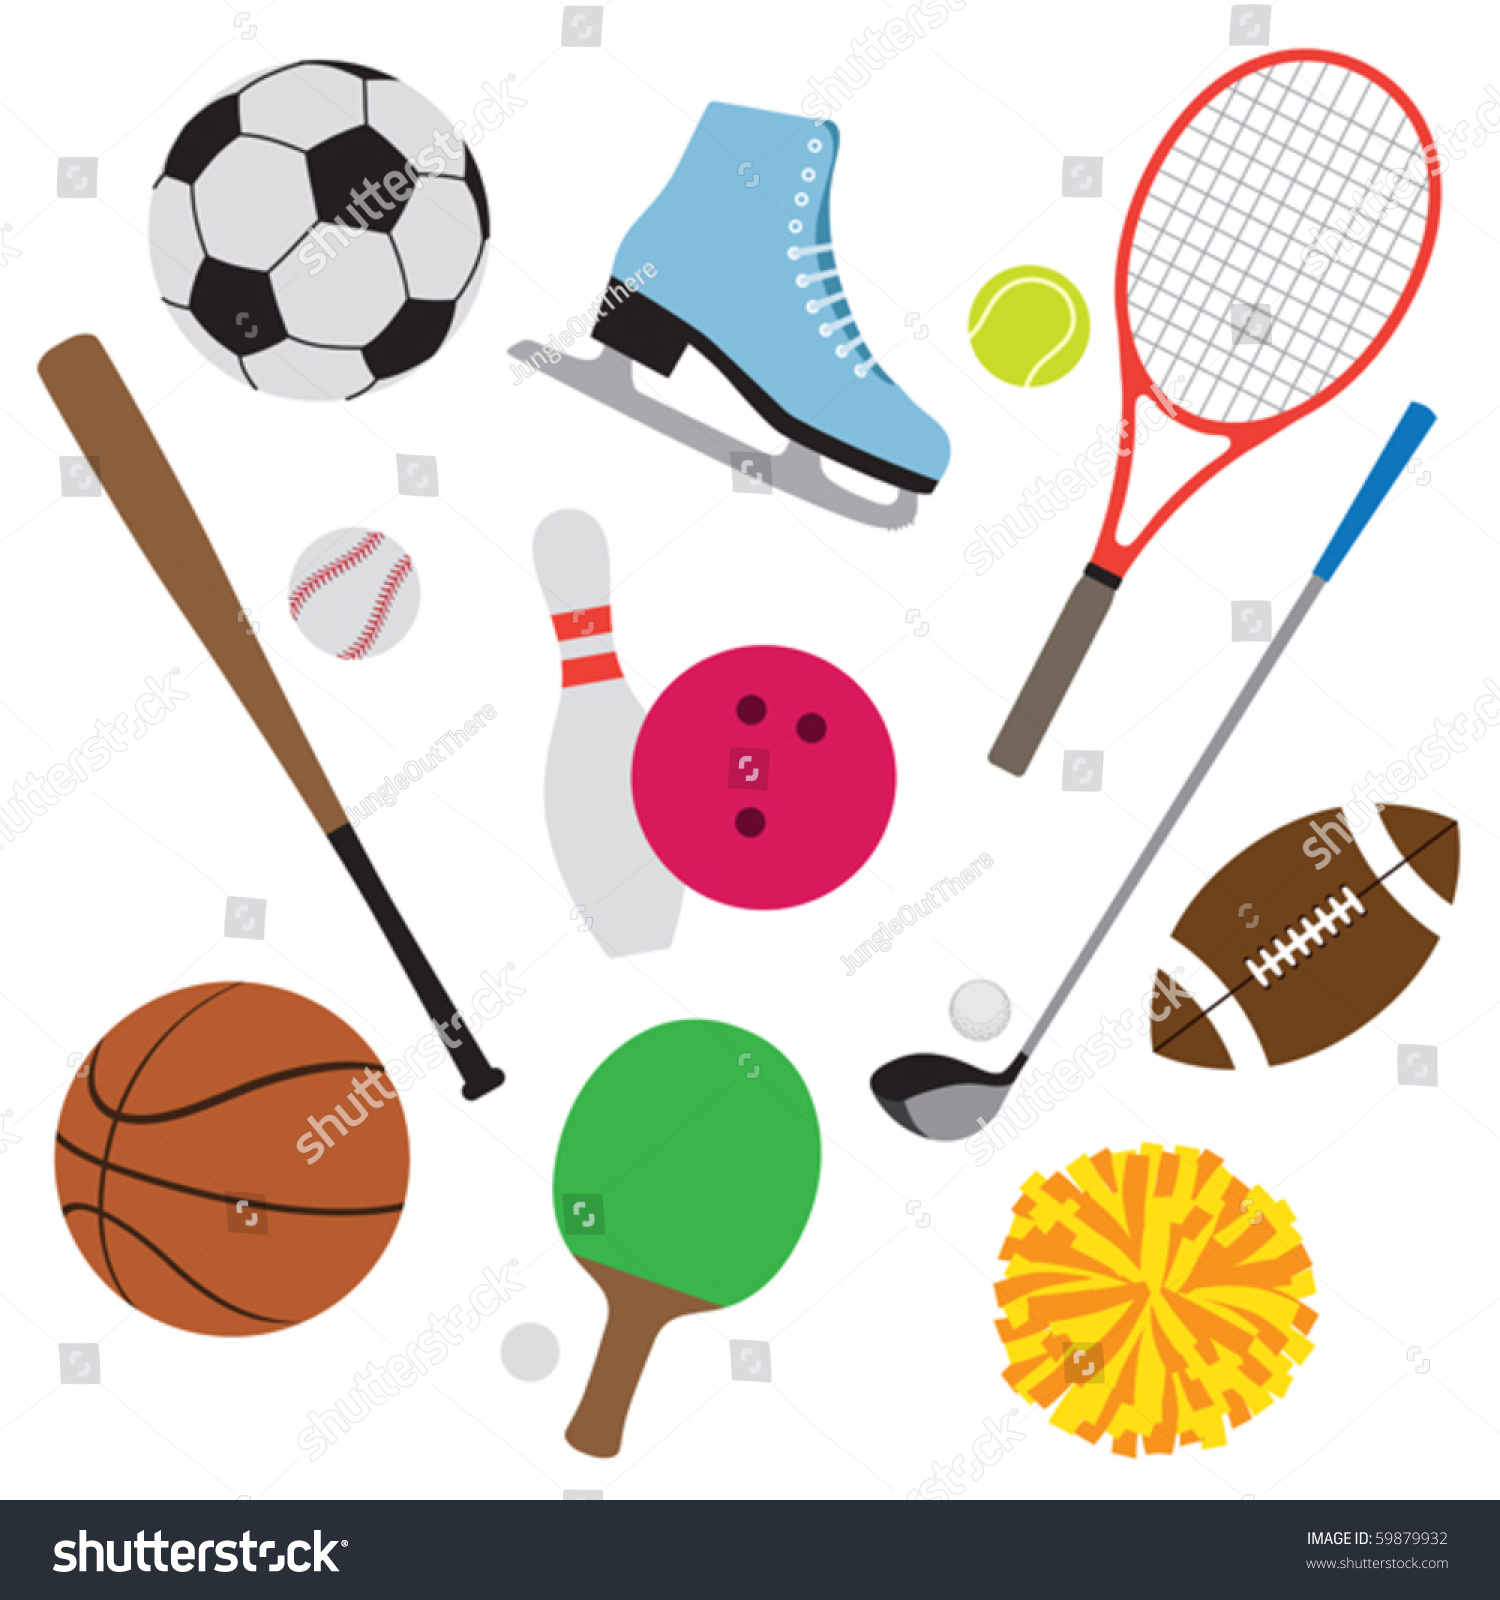 sports clipart collection - photo #29